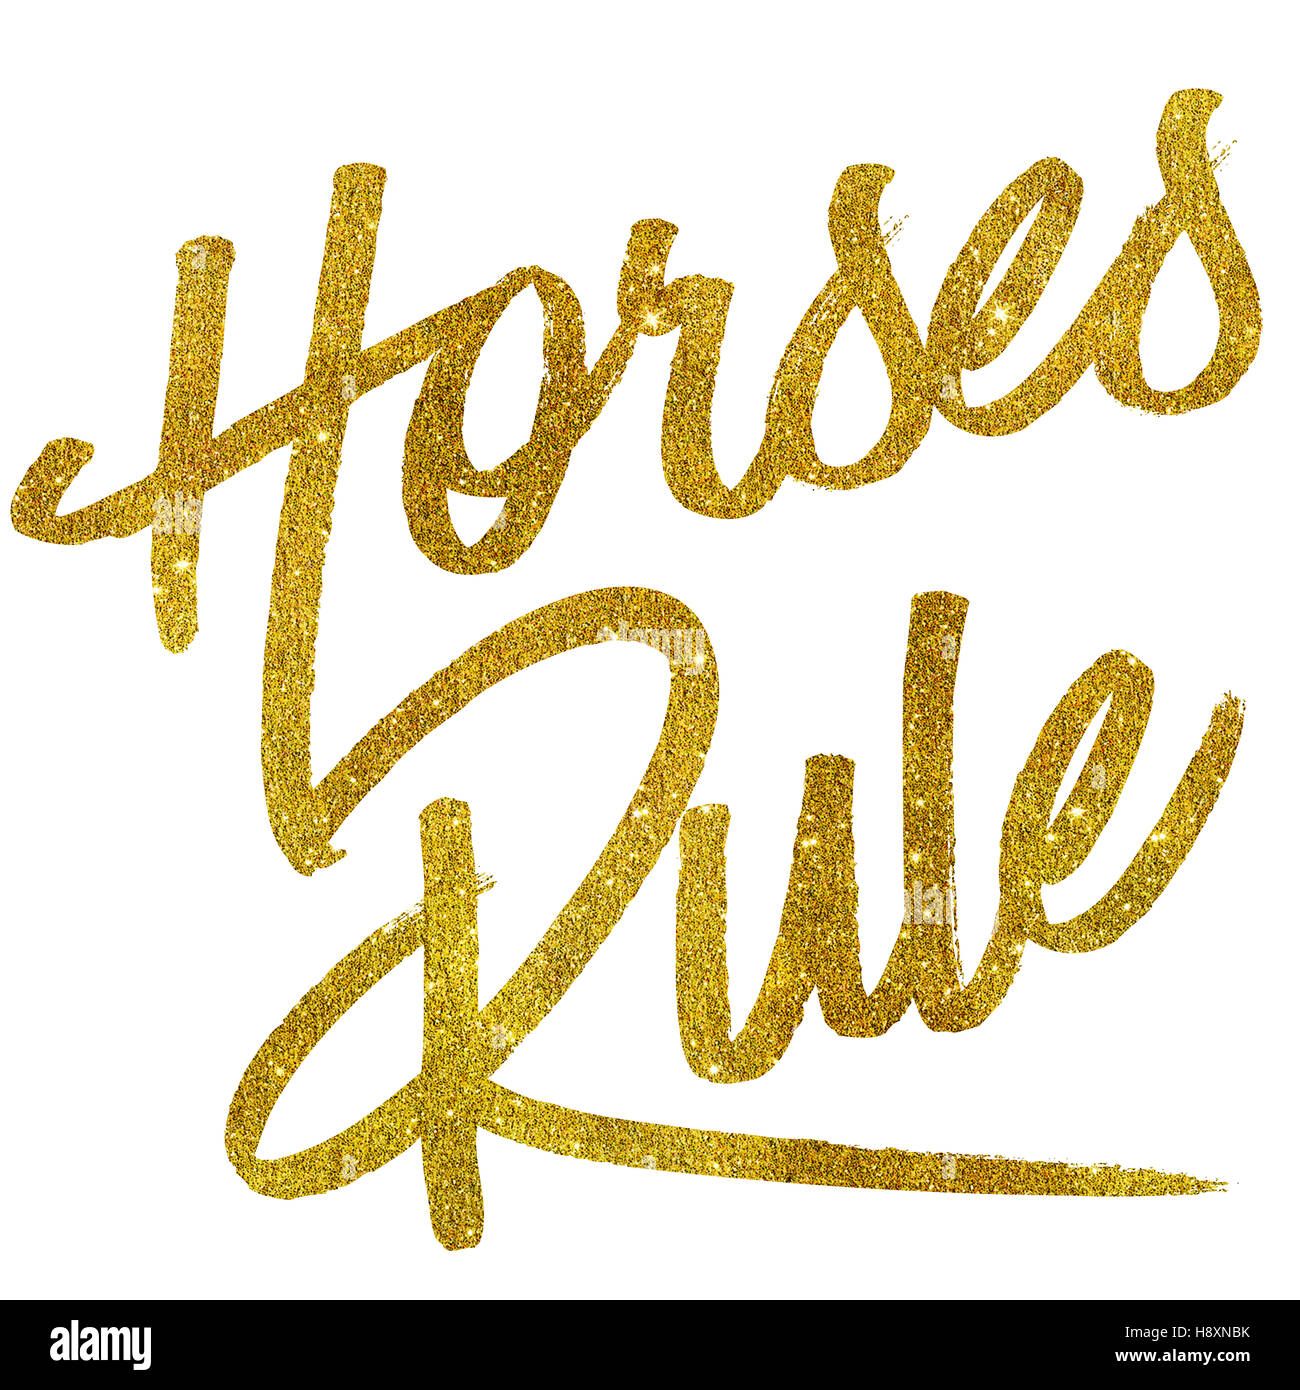 Horses Rule Gold Faux Foil Metallic Glitter Quote Isolated Stock Photo